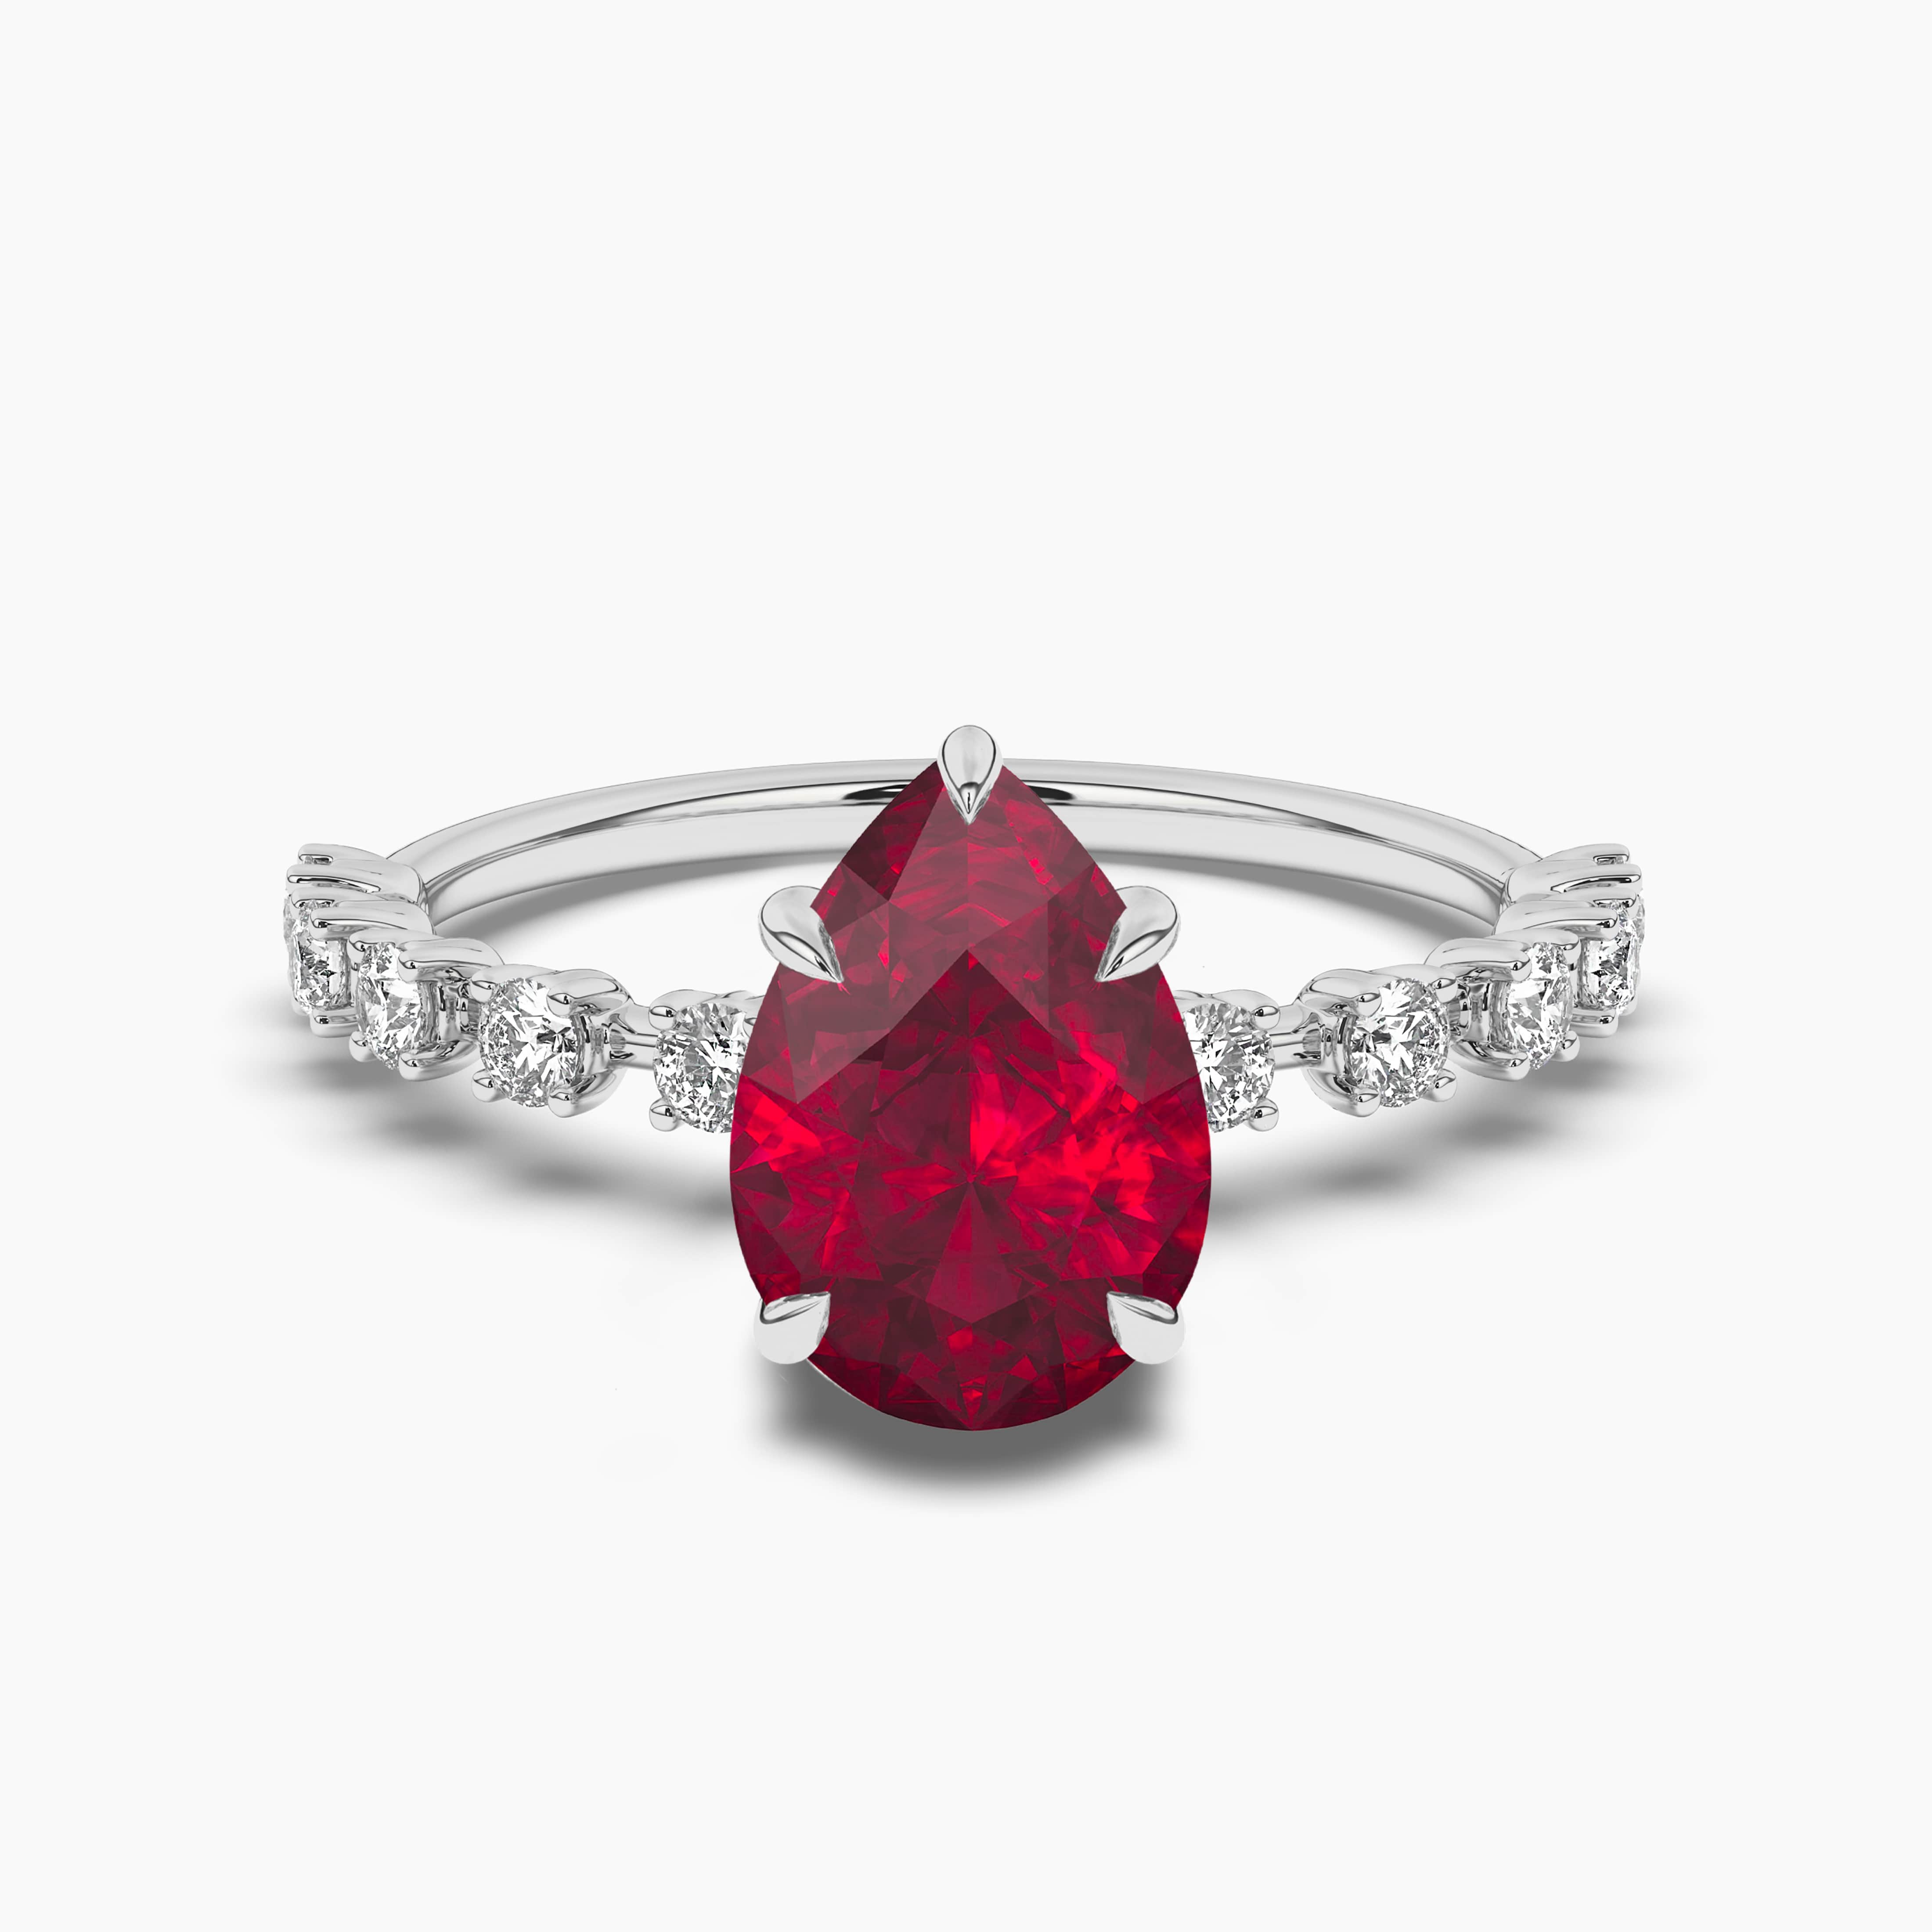 PEAR CUT RUBY ENGAGEMENT RING IN WHITE GOLD